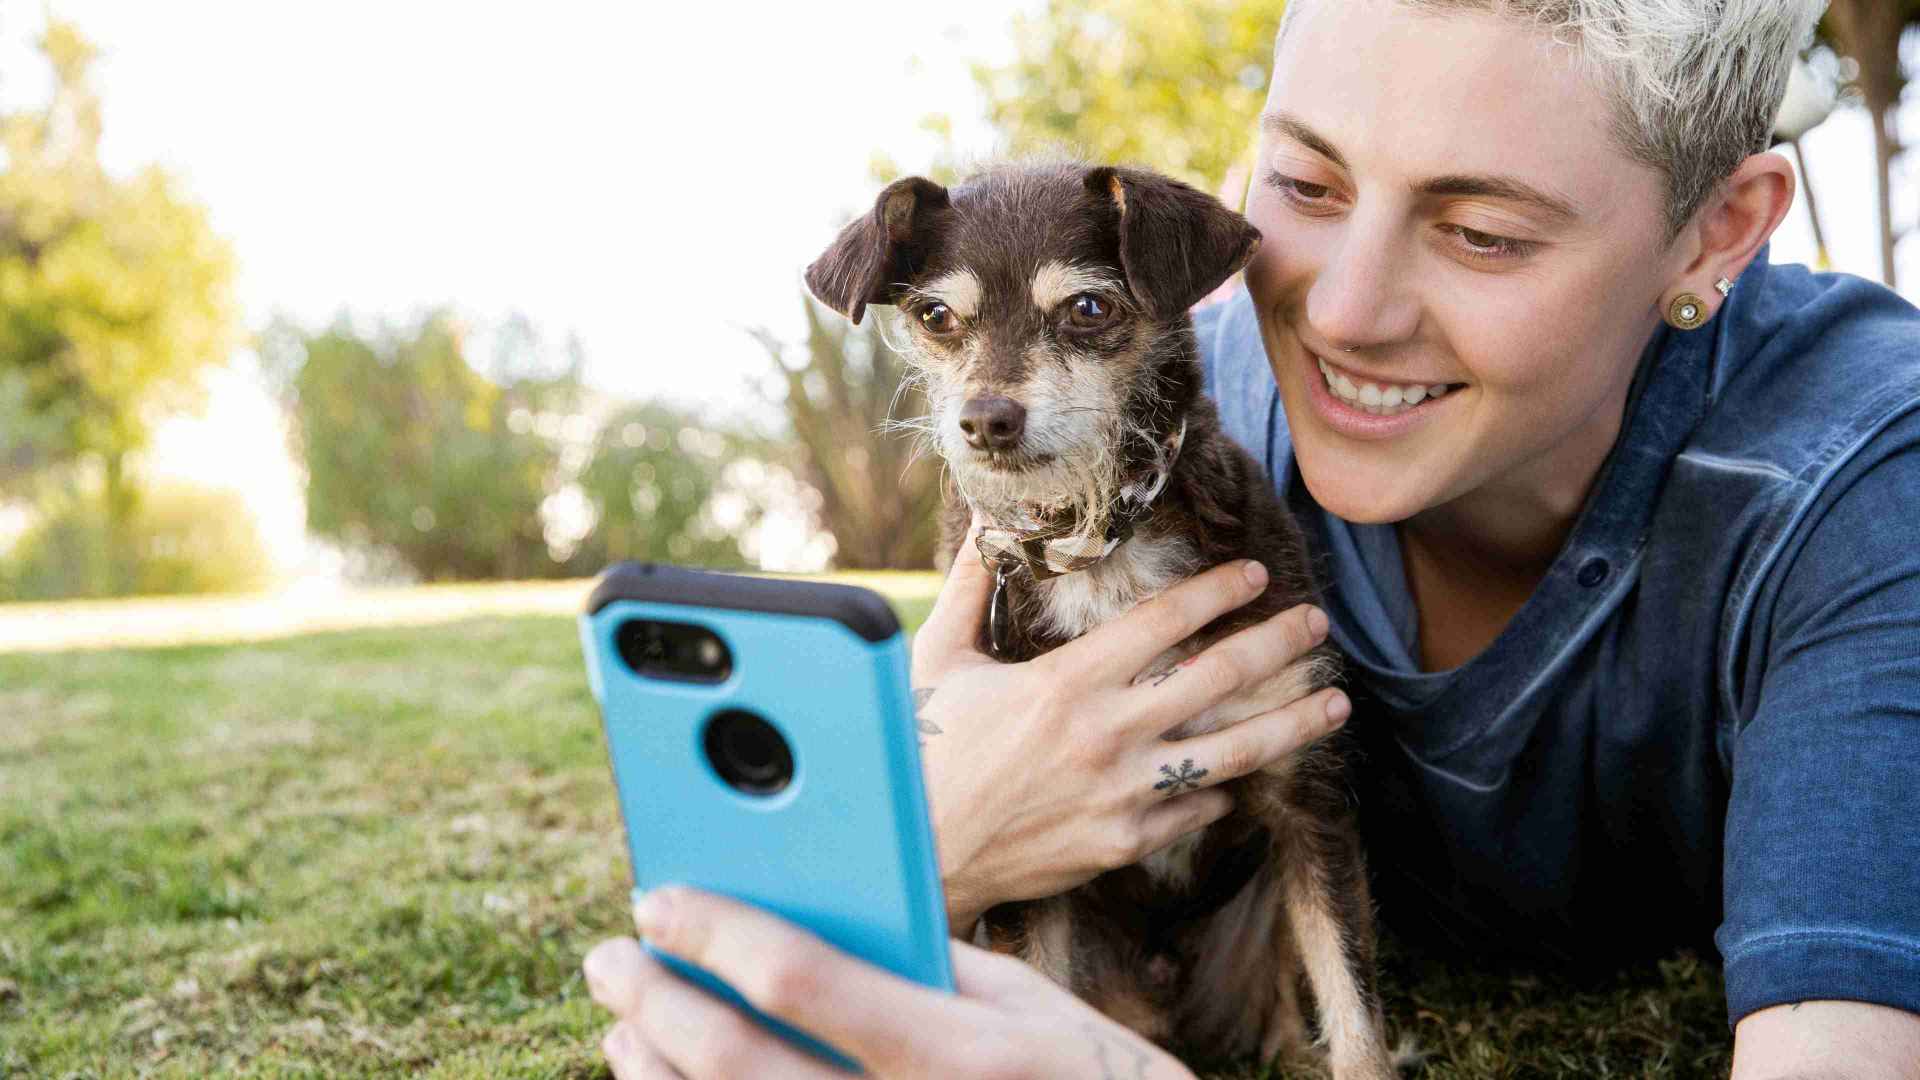 Owner and dog looking at phone